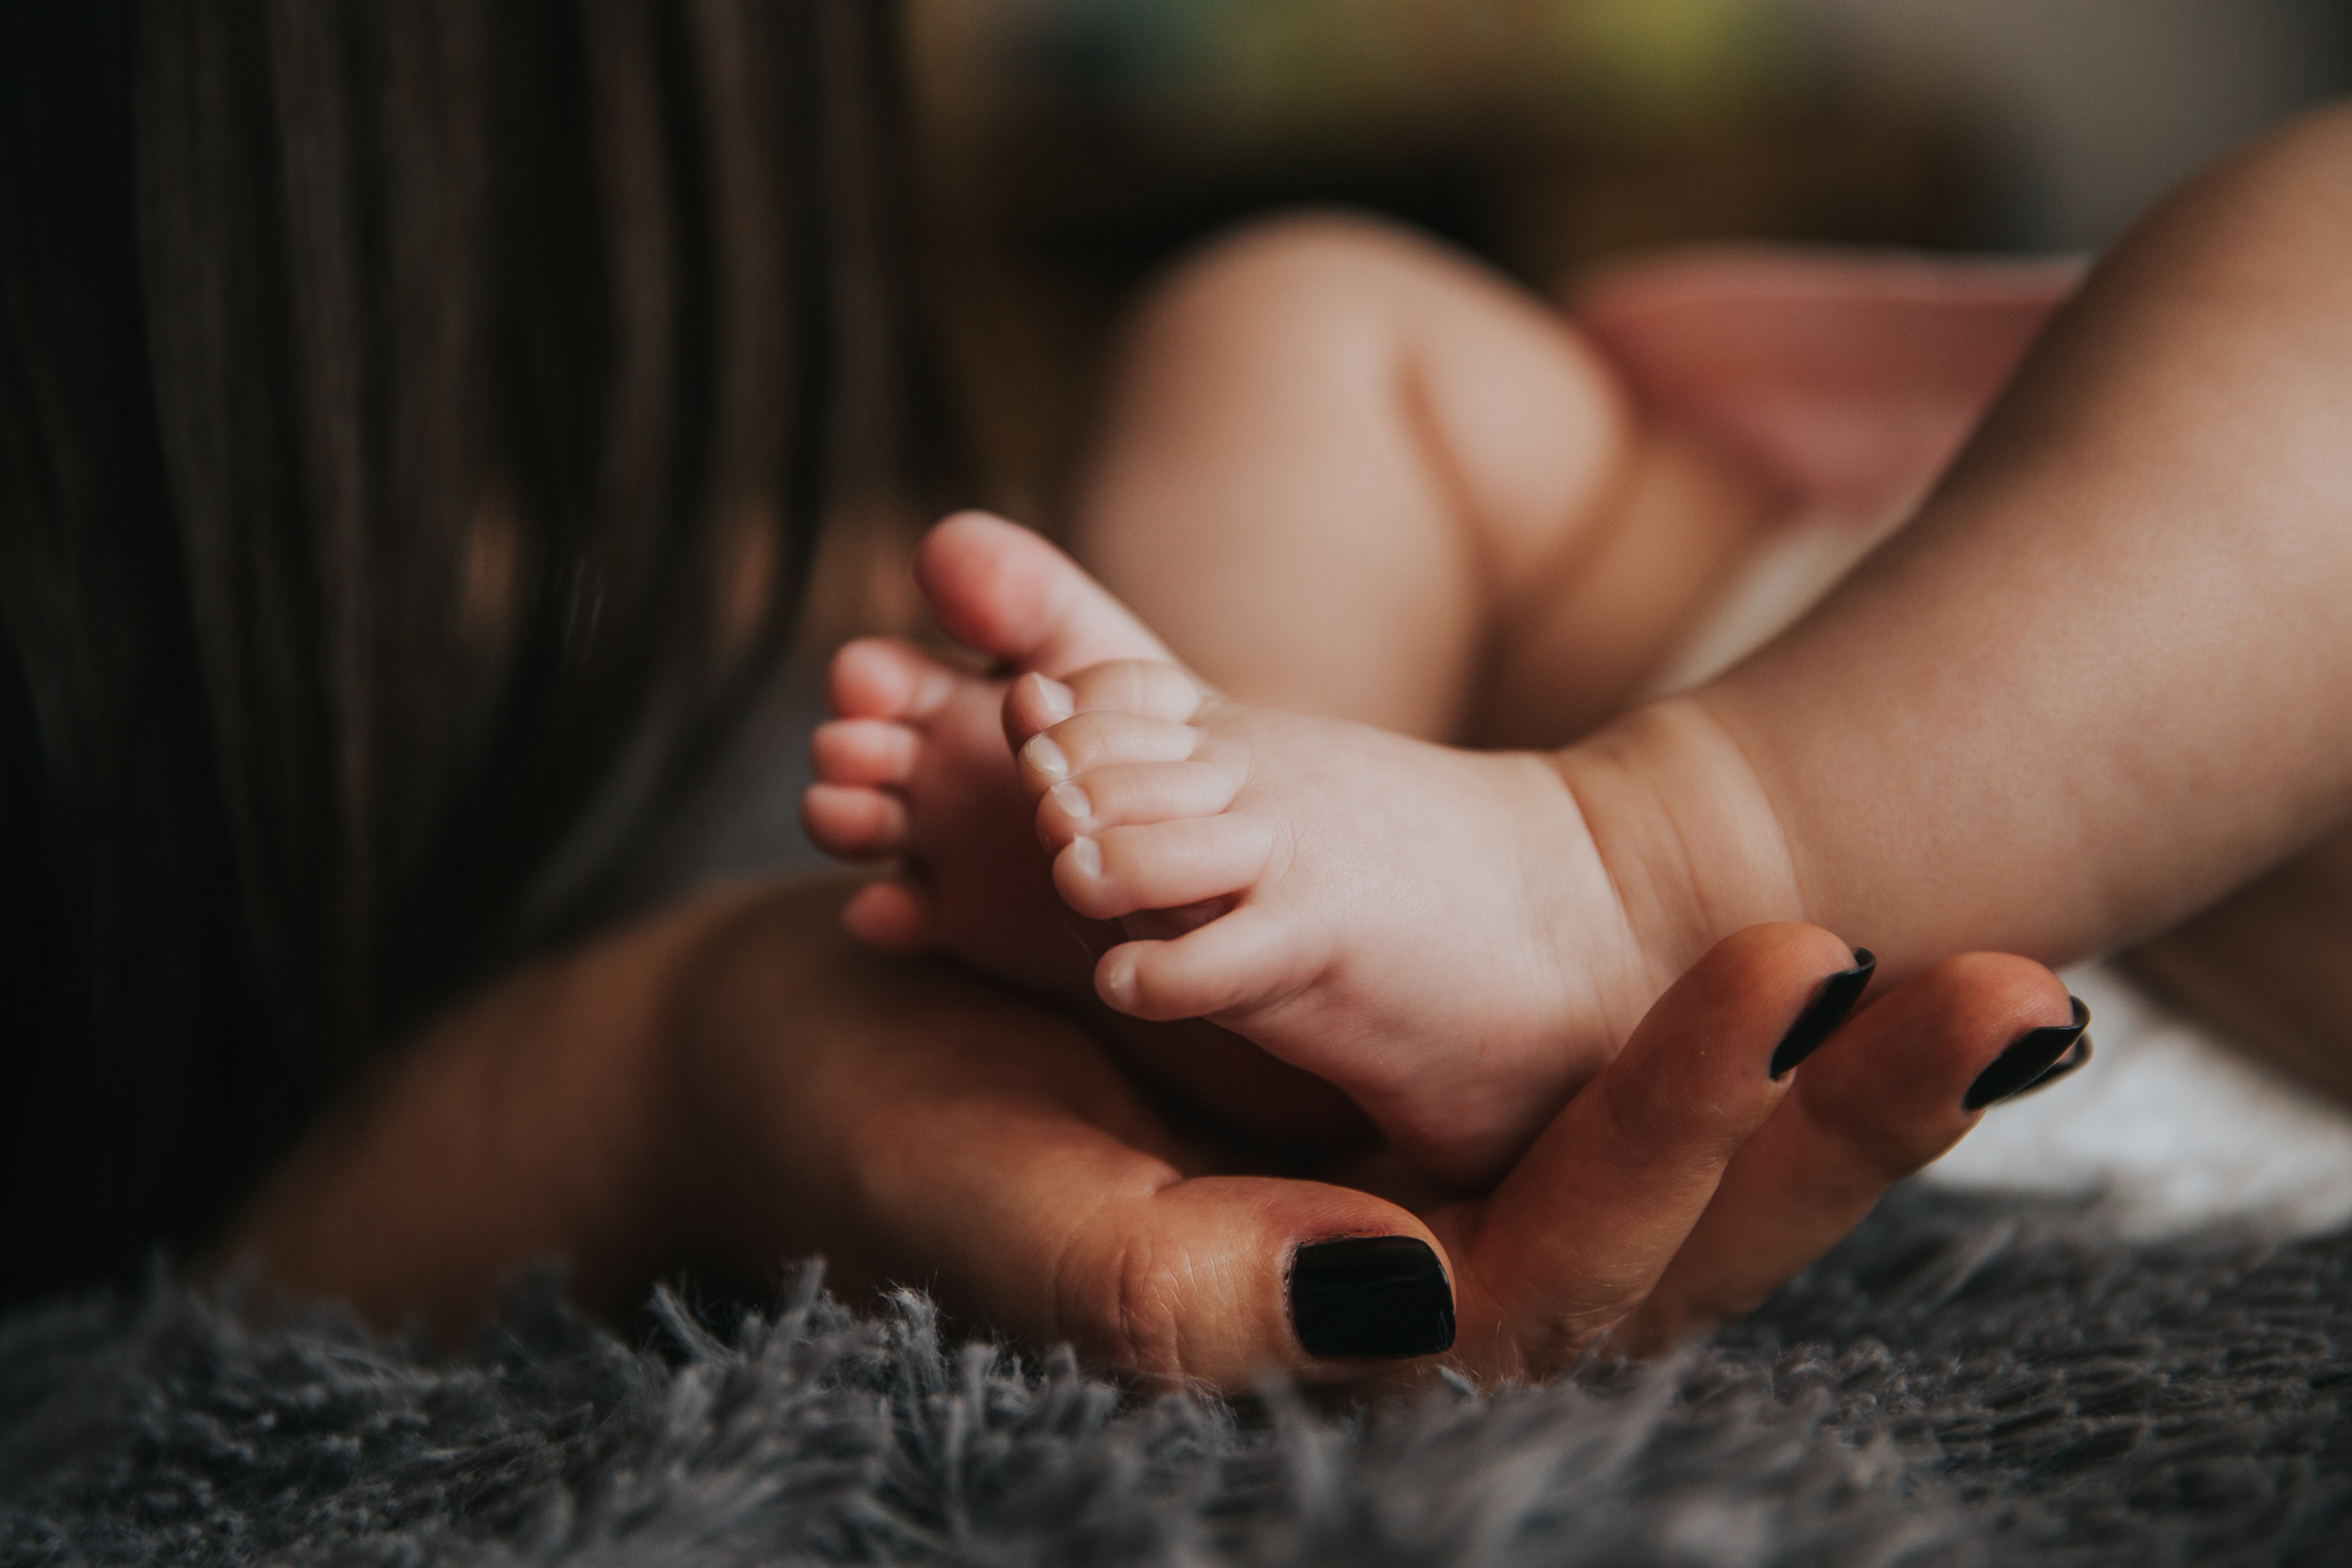 A mother gently holds her infant's feet.